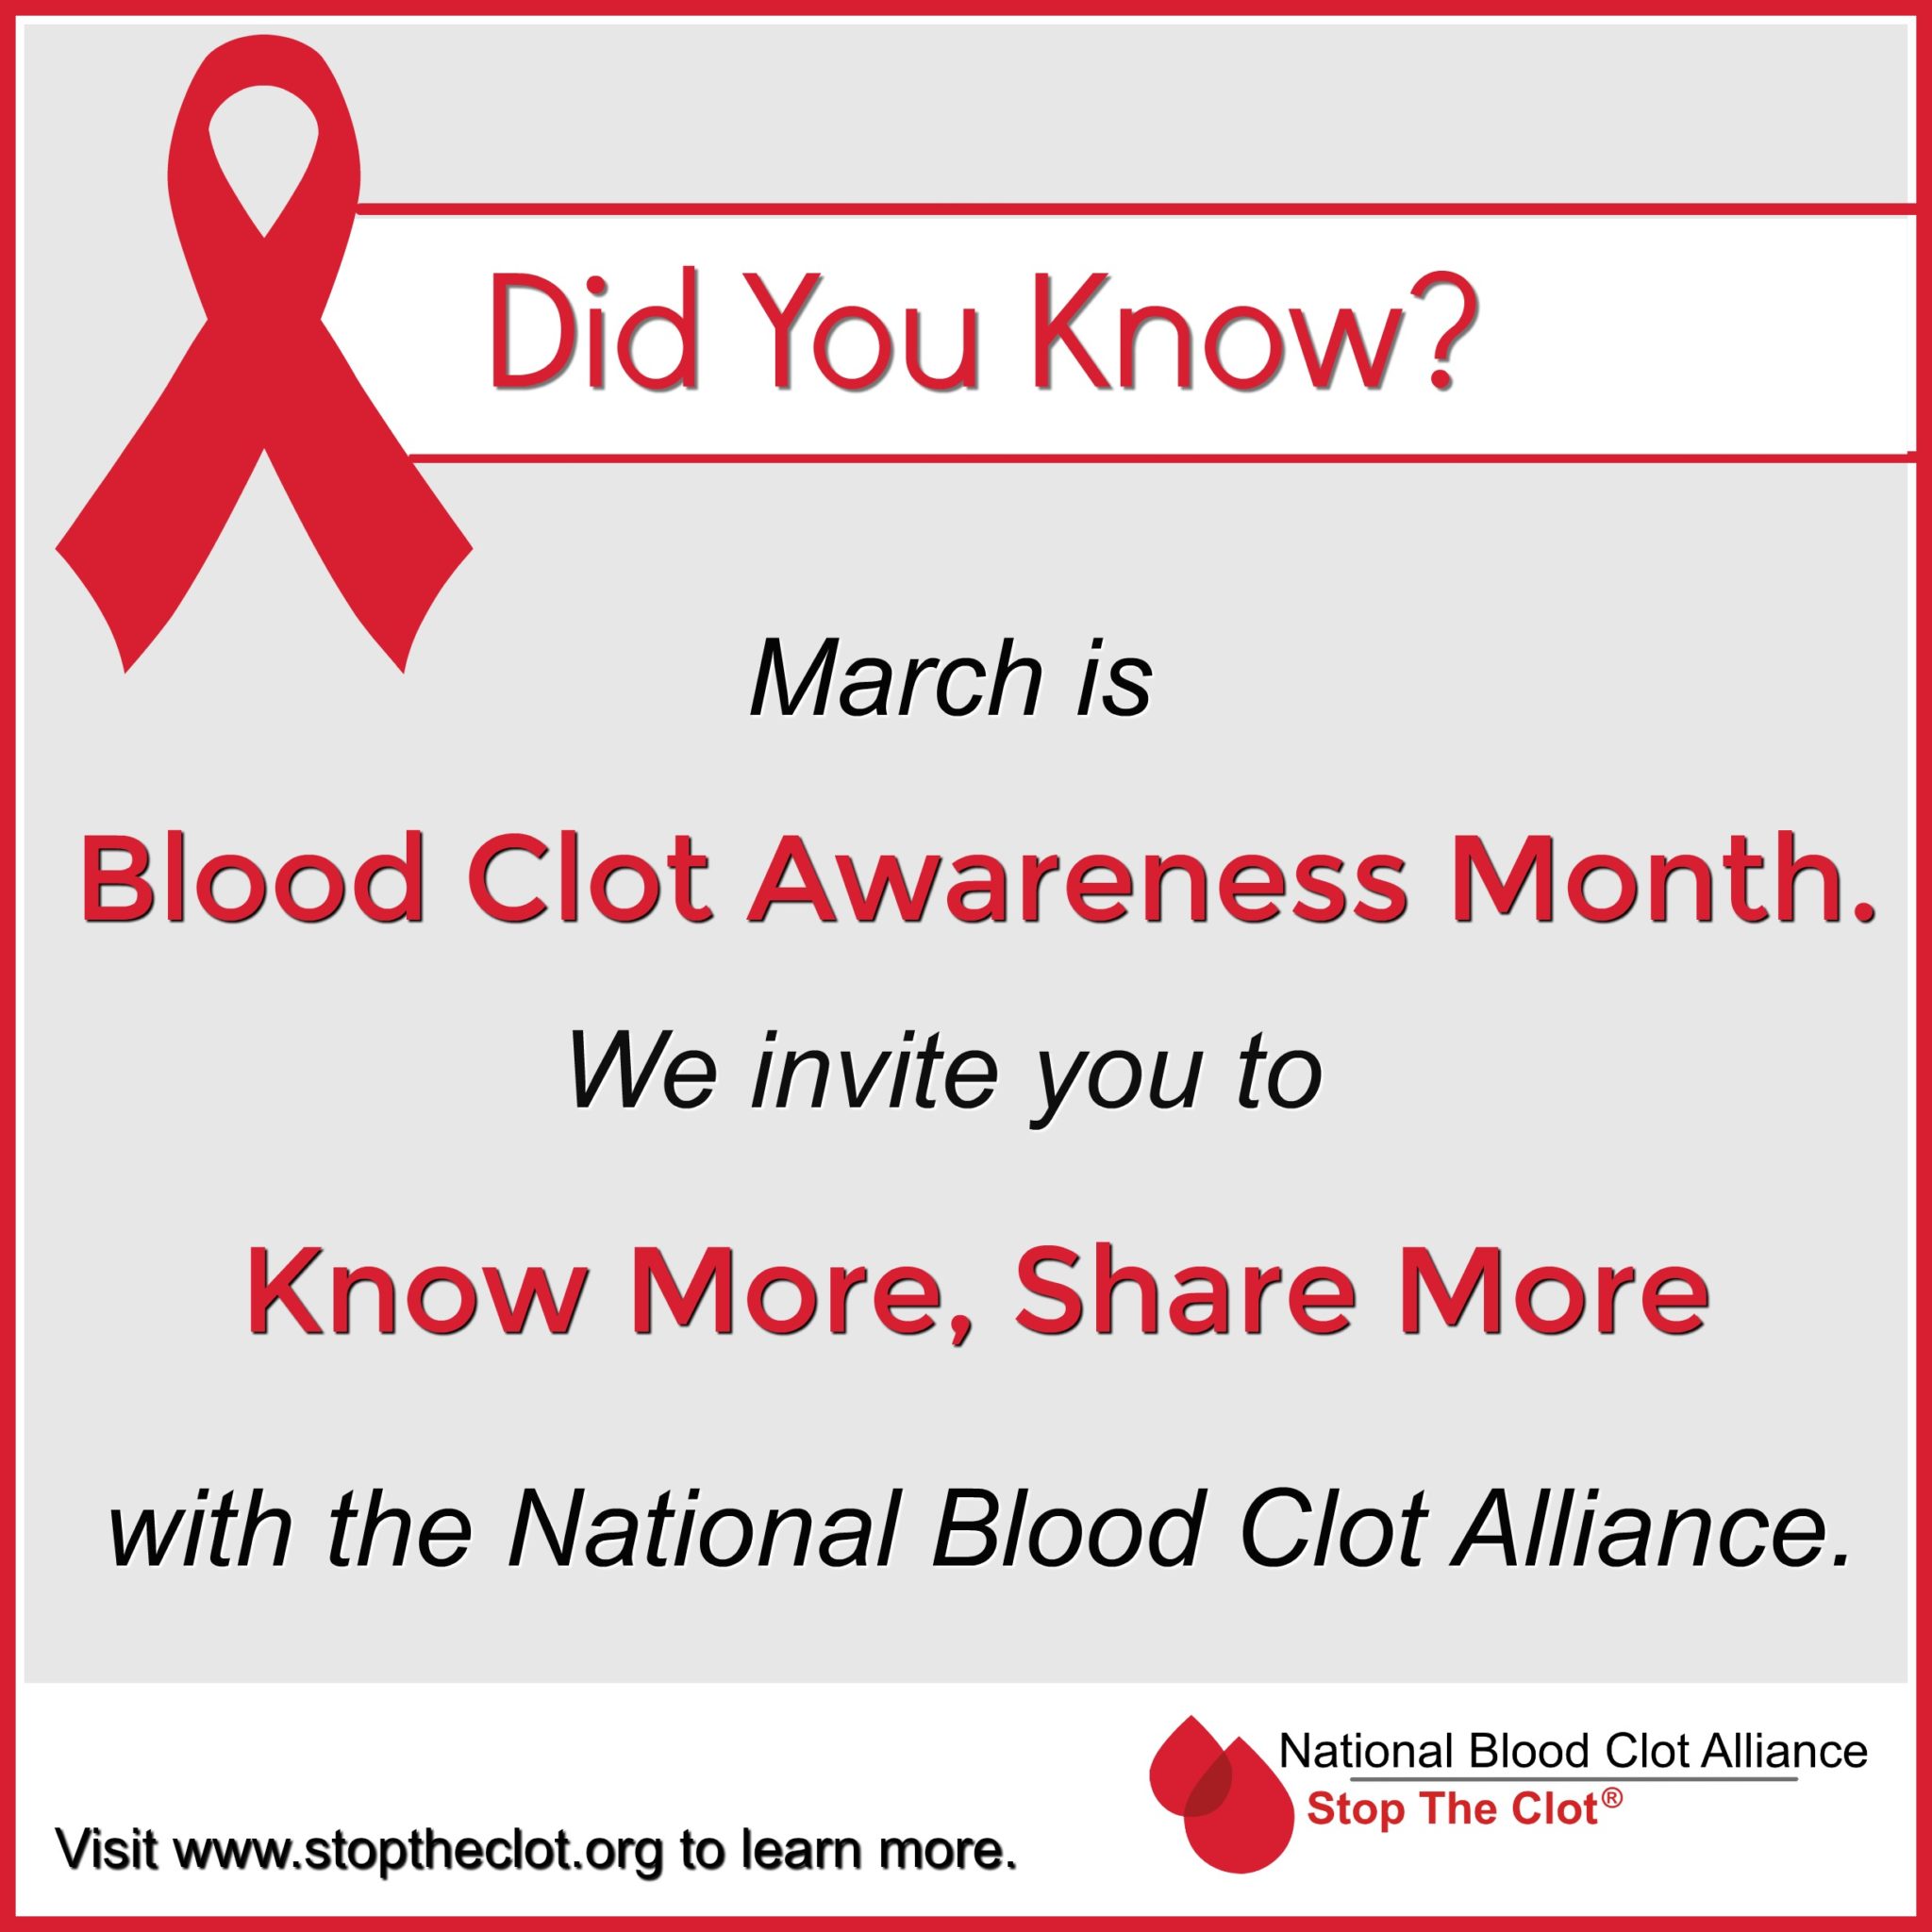 March is National Deep Vein Thrombosis Awareness Month. Why it